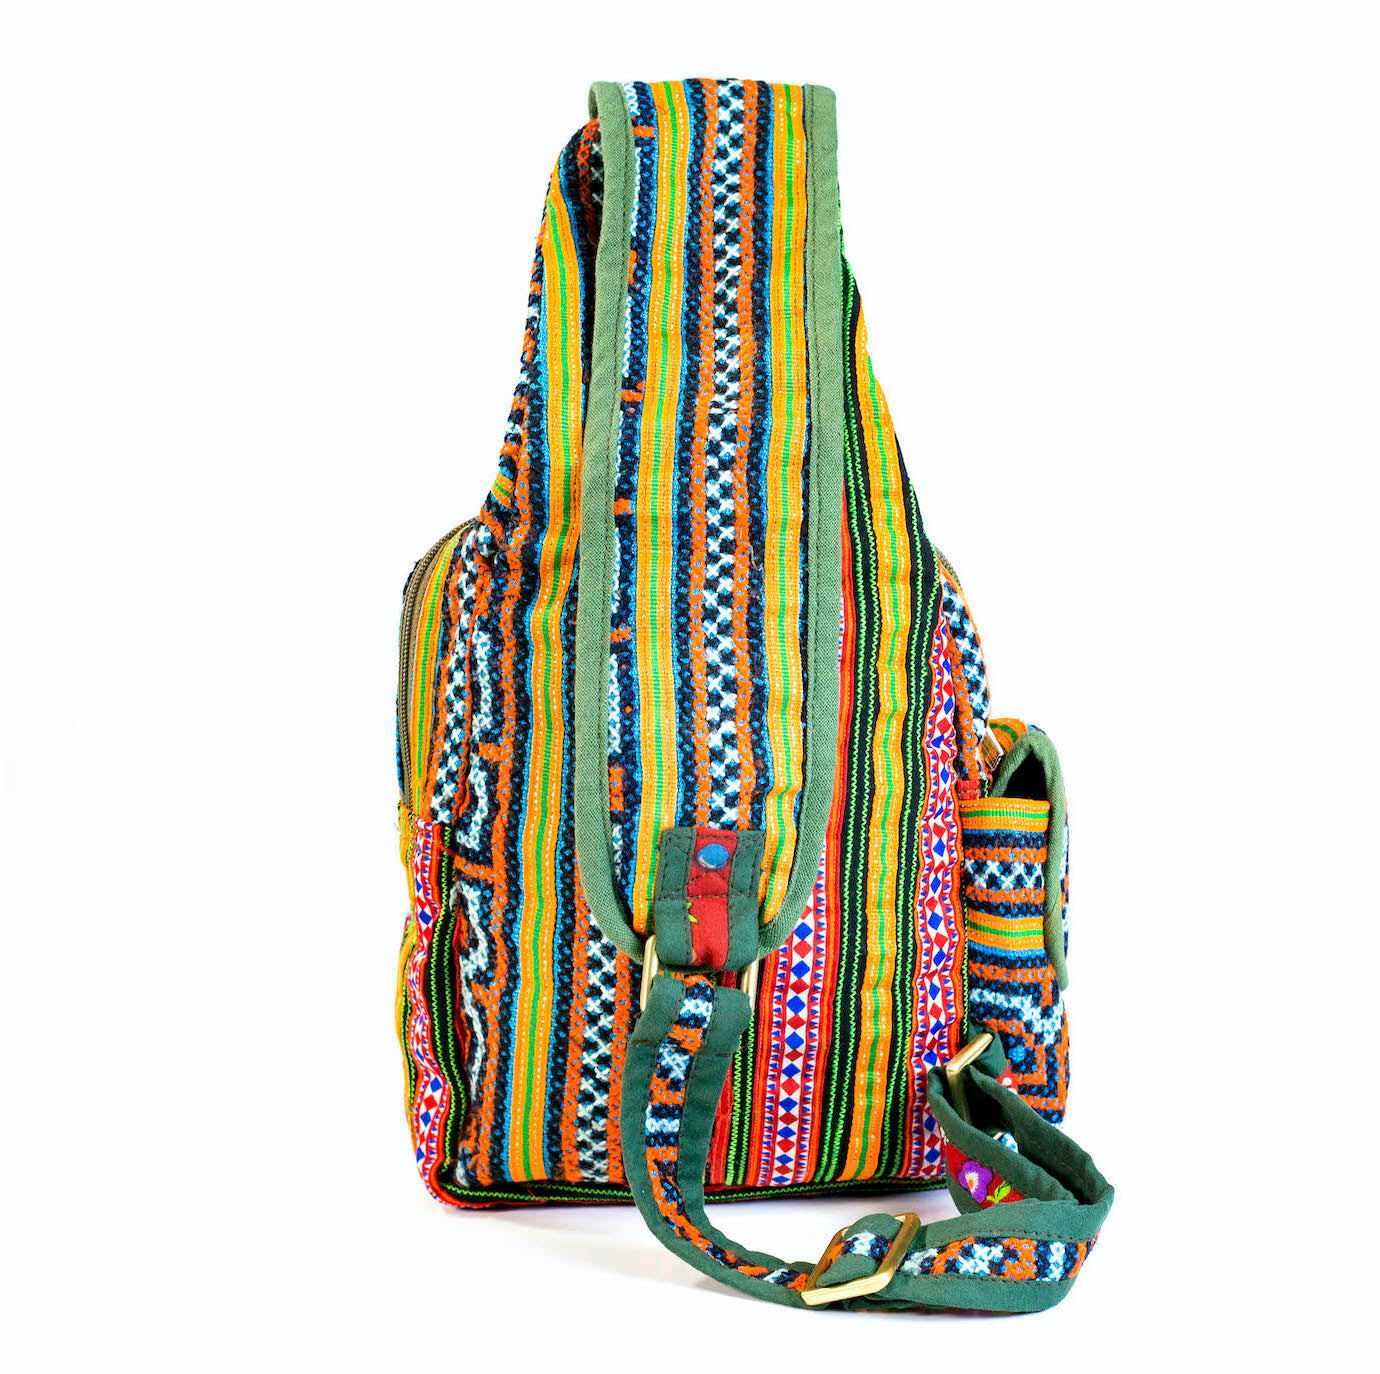 Boho-style linen, embroidery Sling bag, H'mong tribal pattern in bright BLUE silk thread